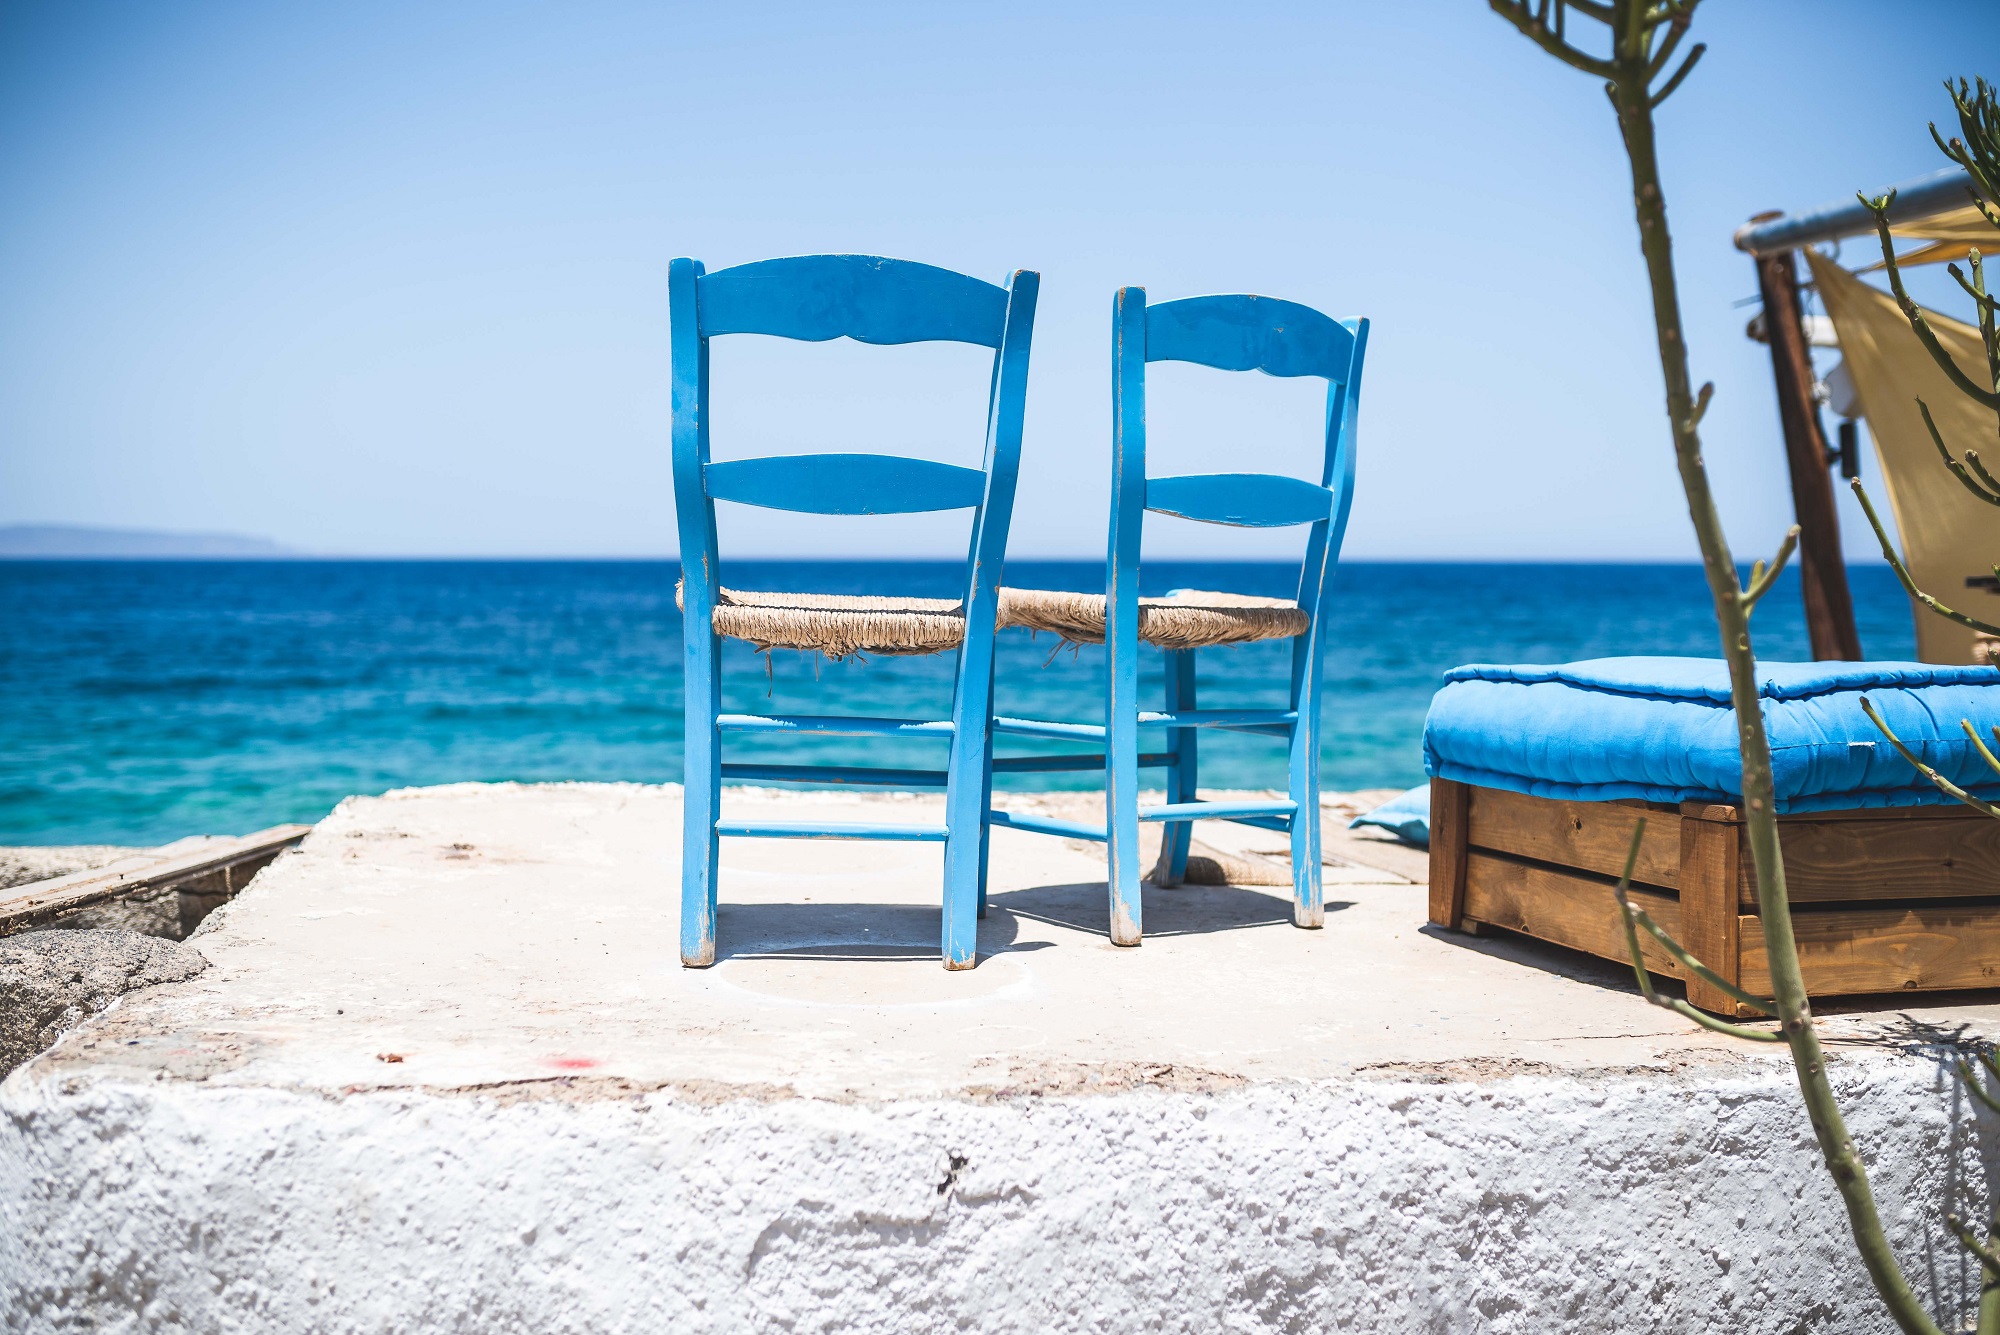 Two chairs sitting by the ocean